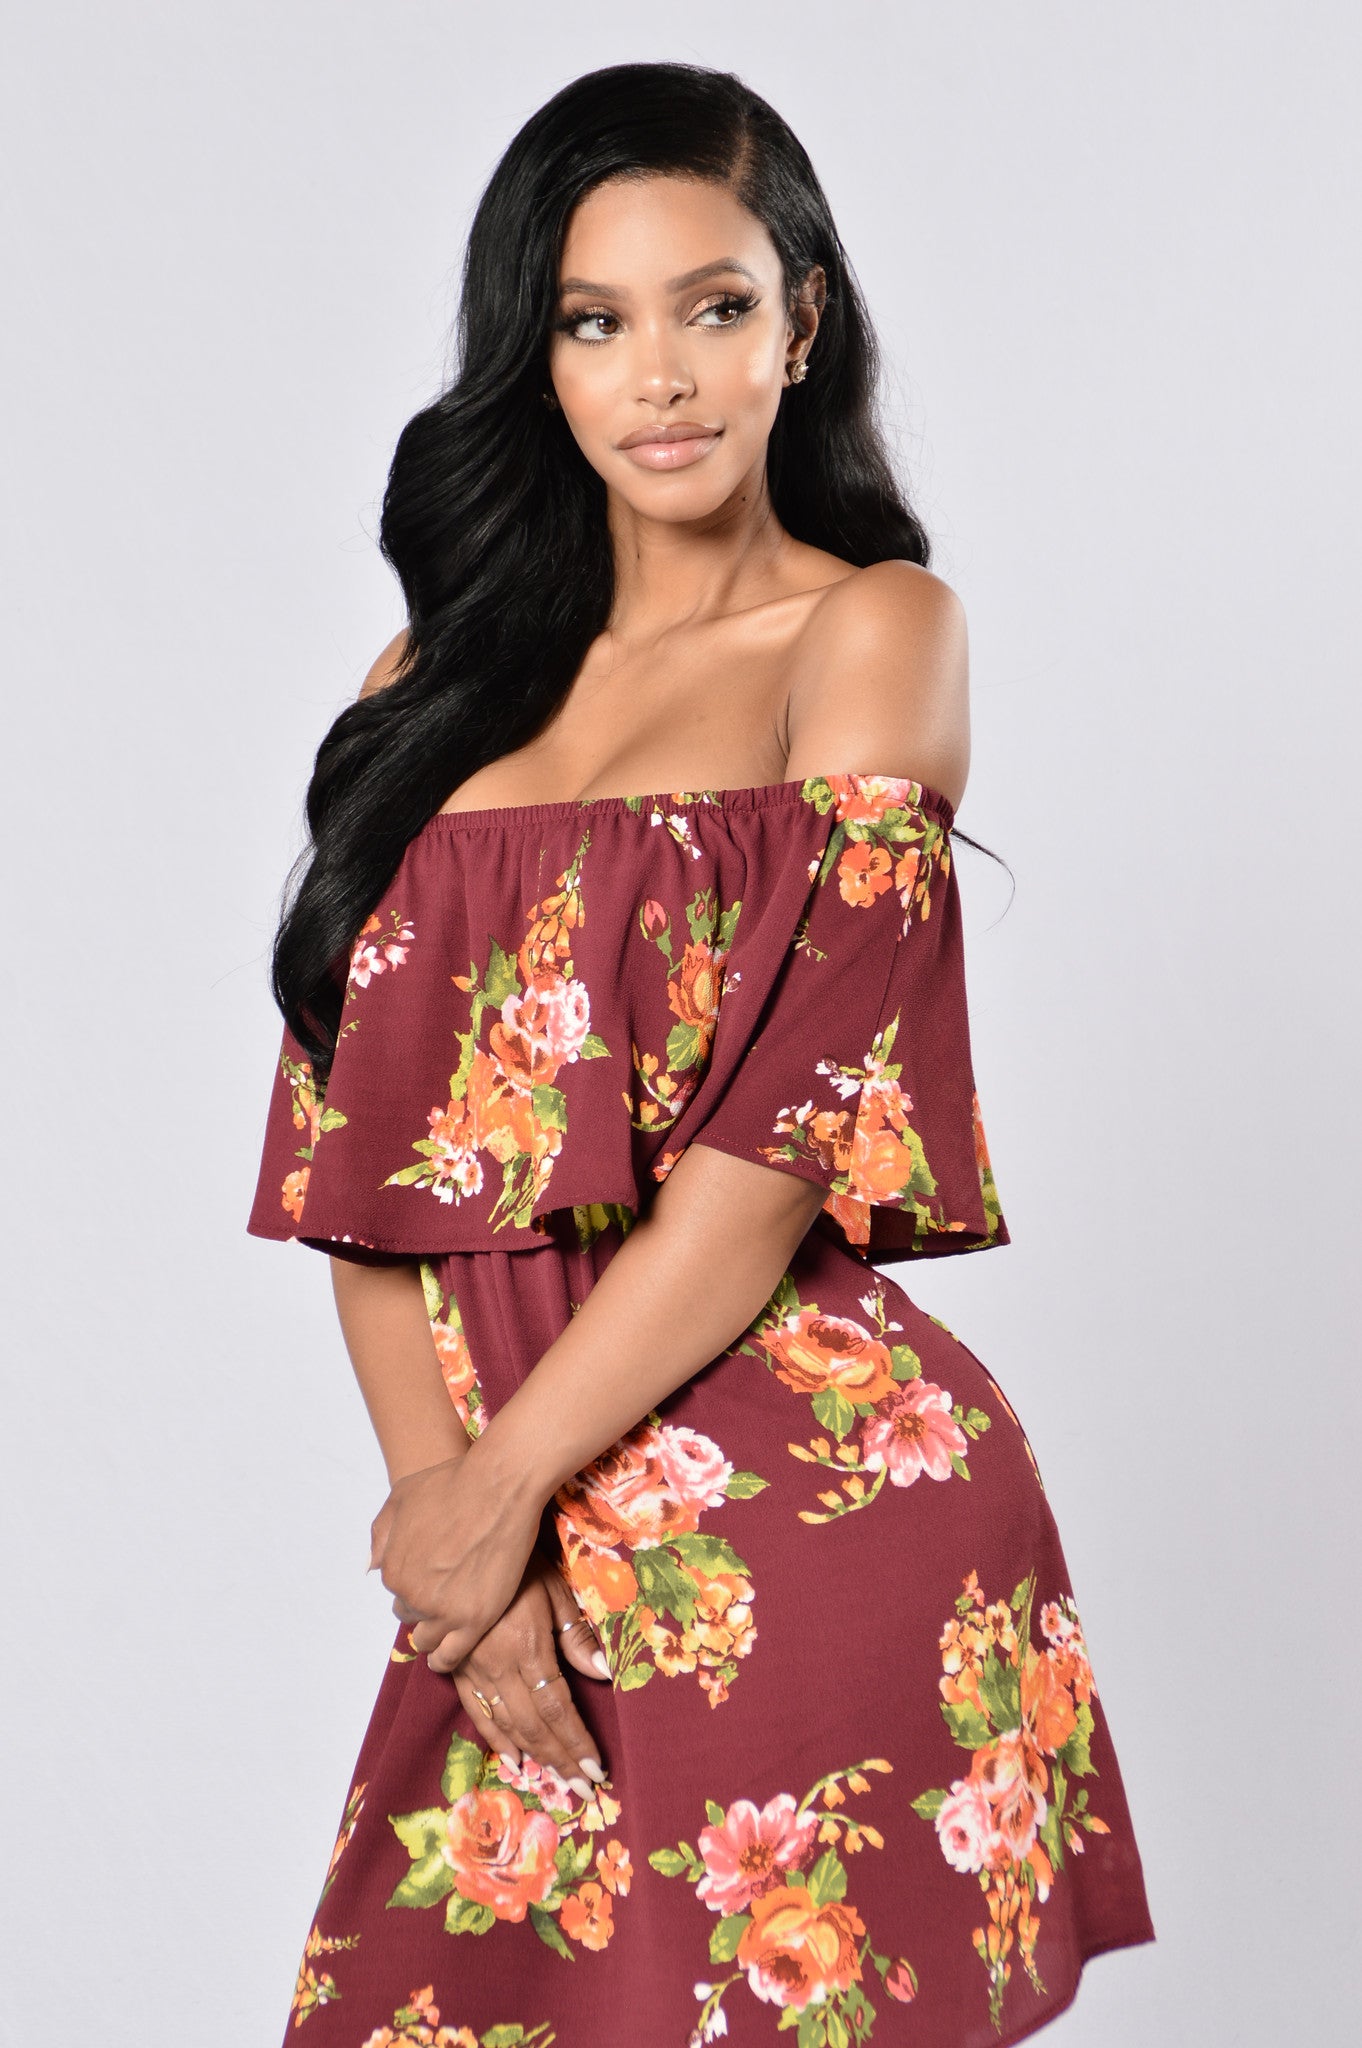 Give Love A Chance Dress - Burgundy Floral